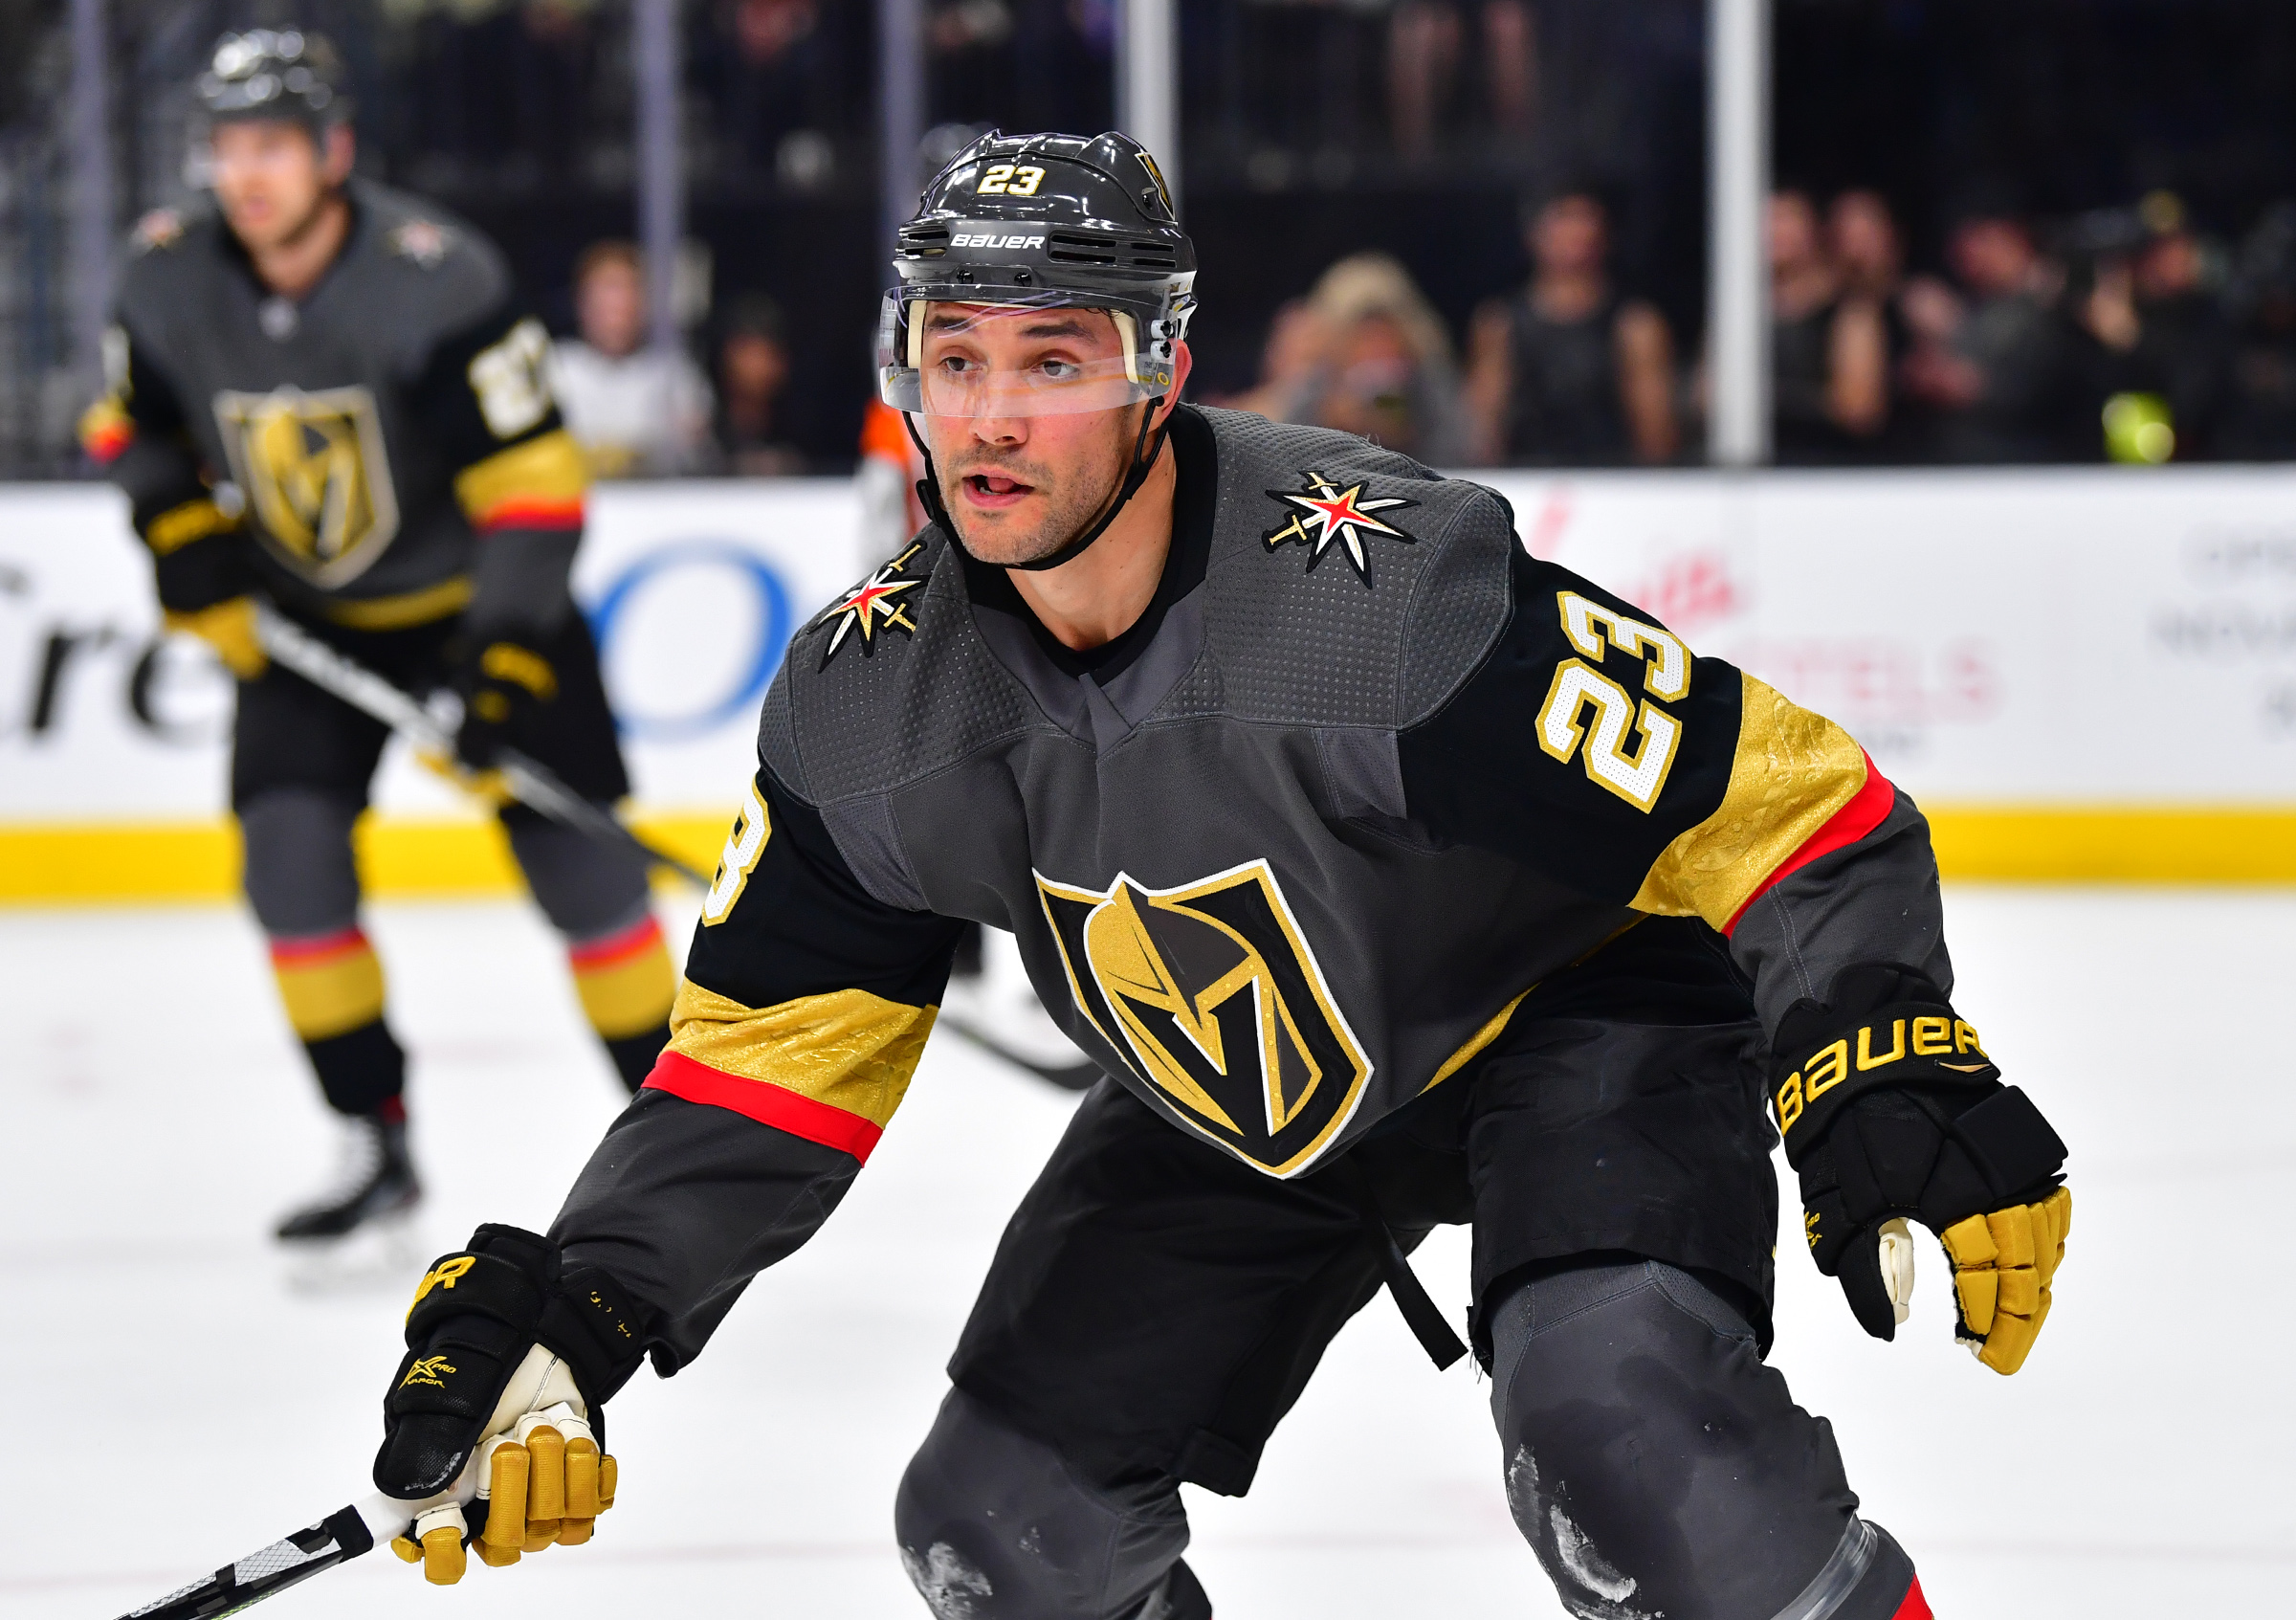 Alec Martinez scores in his Golden Knights debut - The Sports Daily